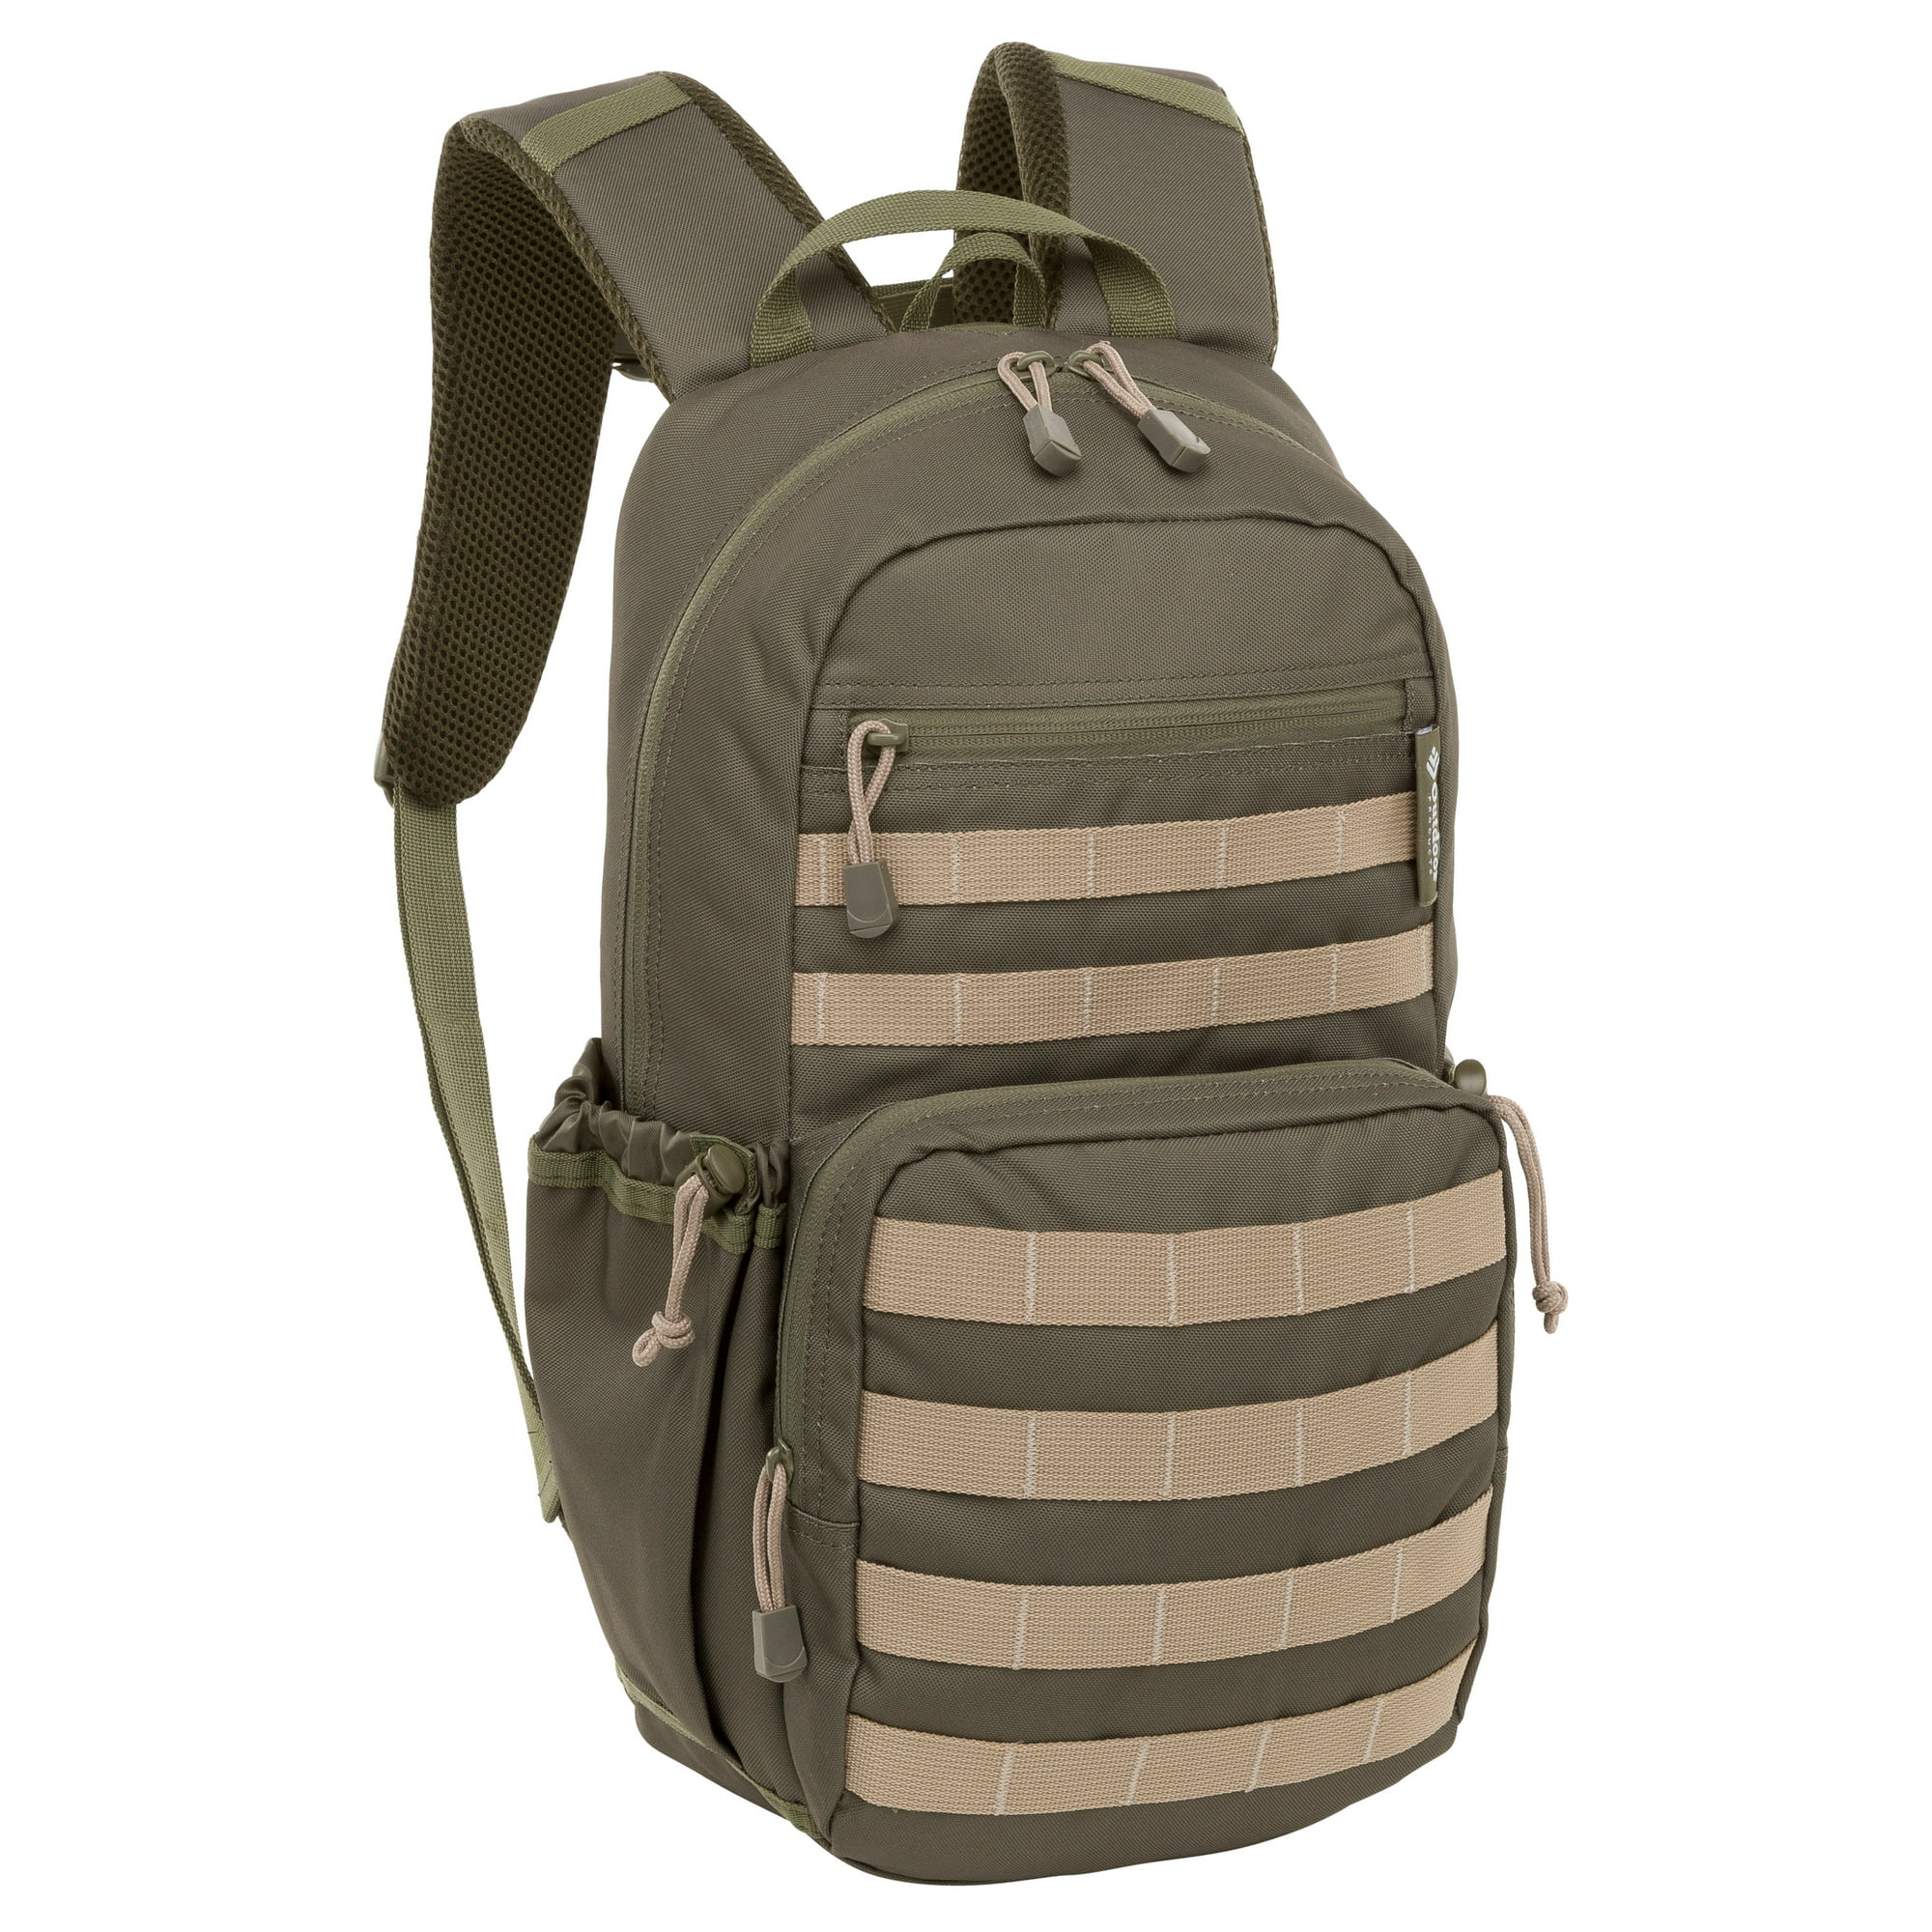 Outdoor Products Venture 17 Backpack, Green and Brown, Adult, Teen - Walmart.com